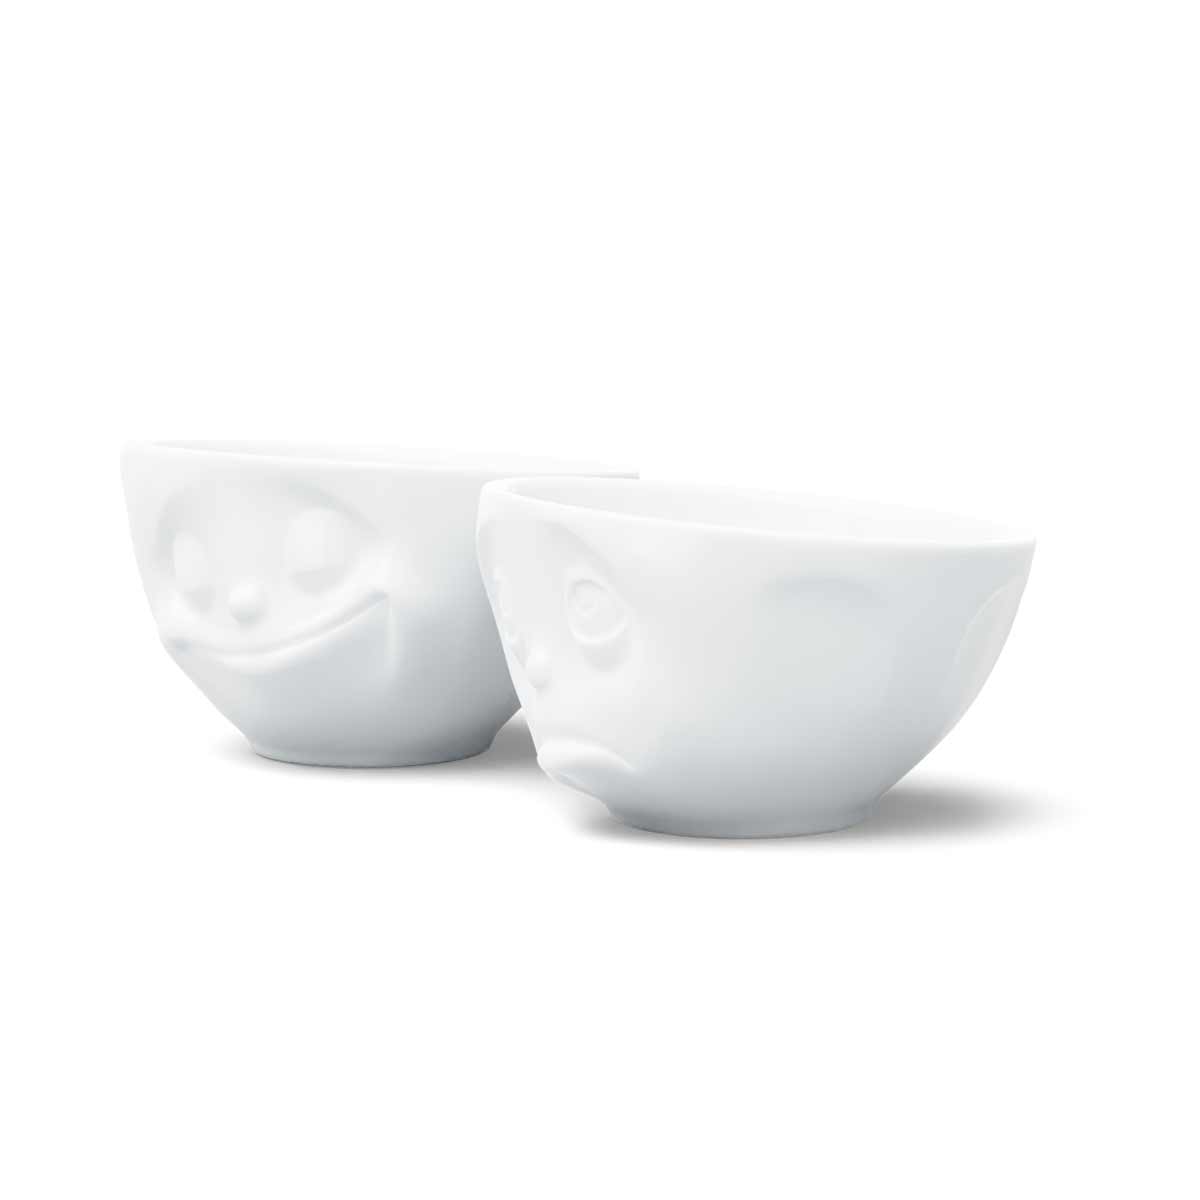 Set of 2 Small Porcelain Bowls by Tassen - Happy and oh please